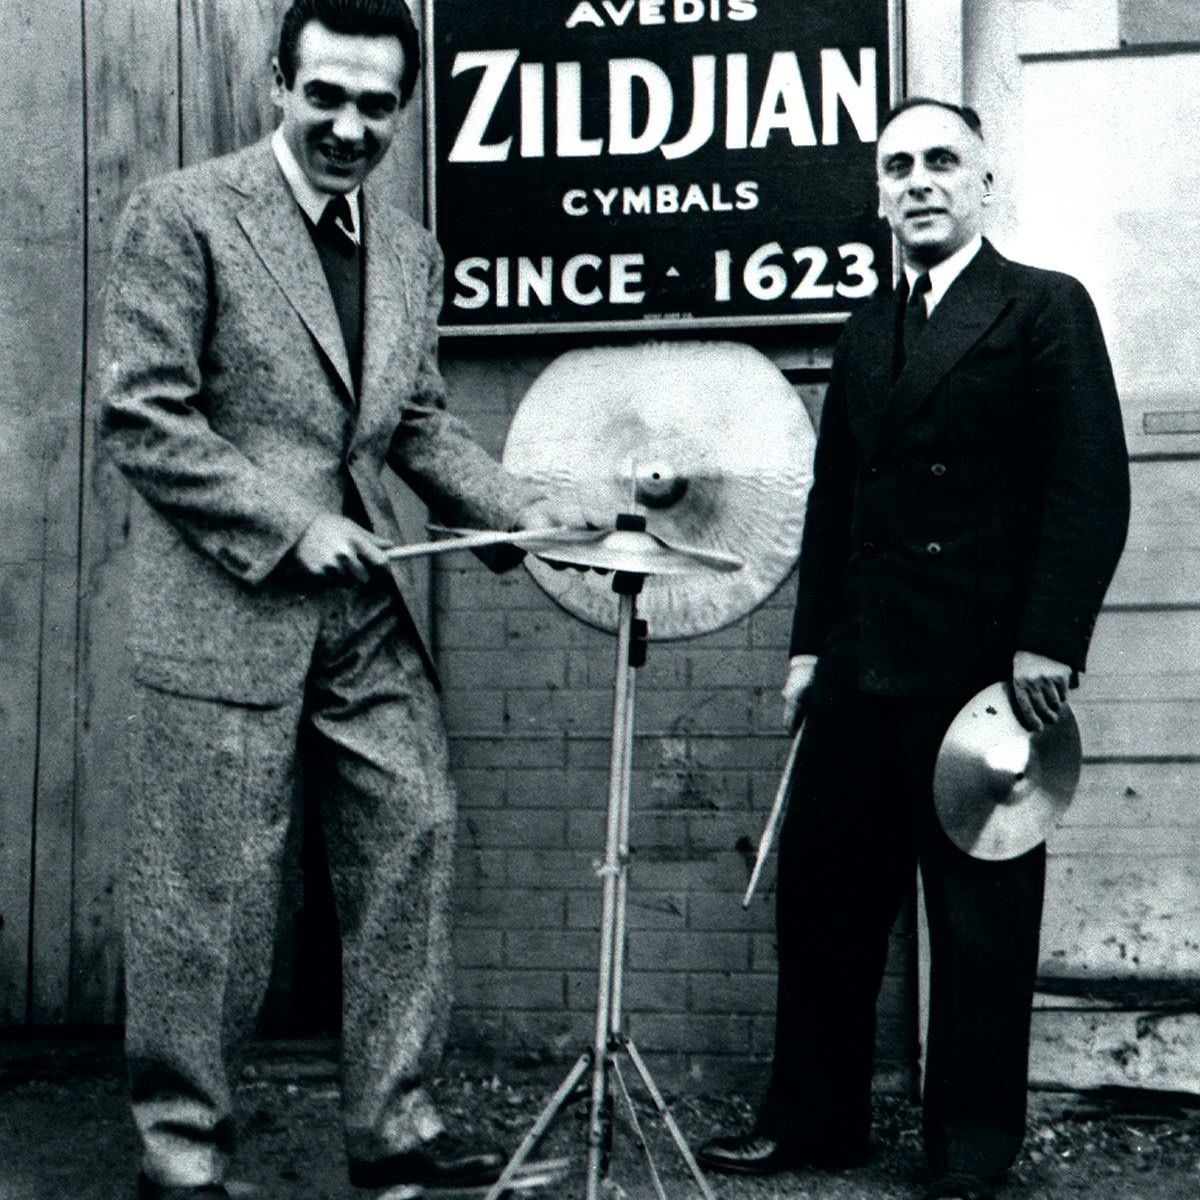 Cymbal-maker Ziljan was founded circa 1623, in a city then known as Constantinople. The company has survived four centuries of geopolitical convulsions to become a mainstay in modern cacophonies concocted by artists like the Foo Fighters and Metallica./5